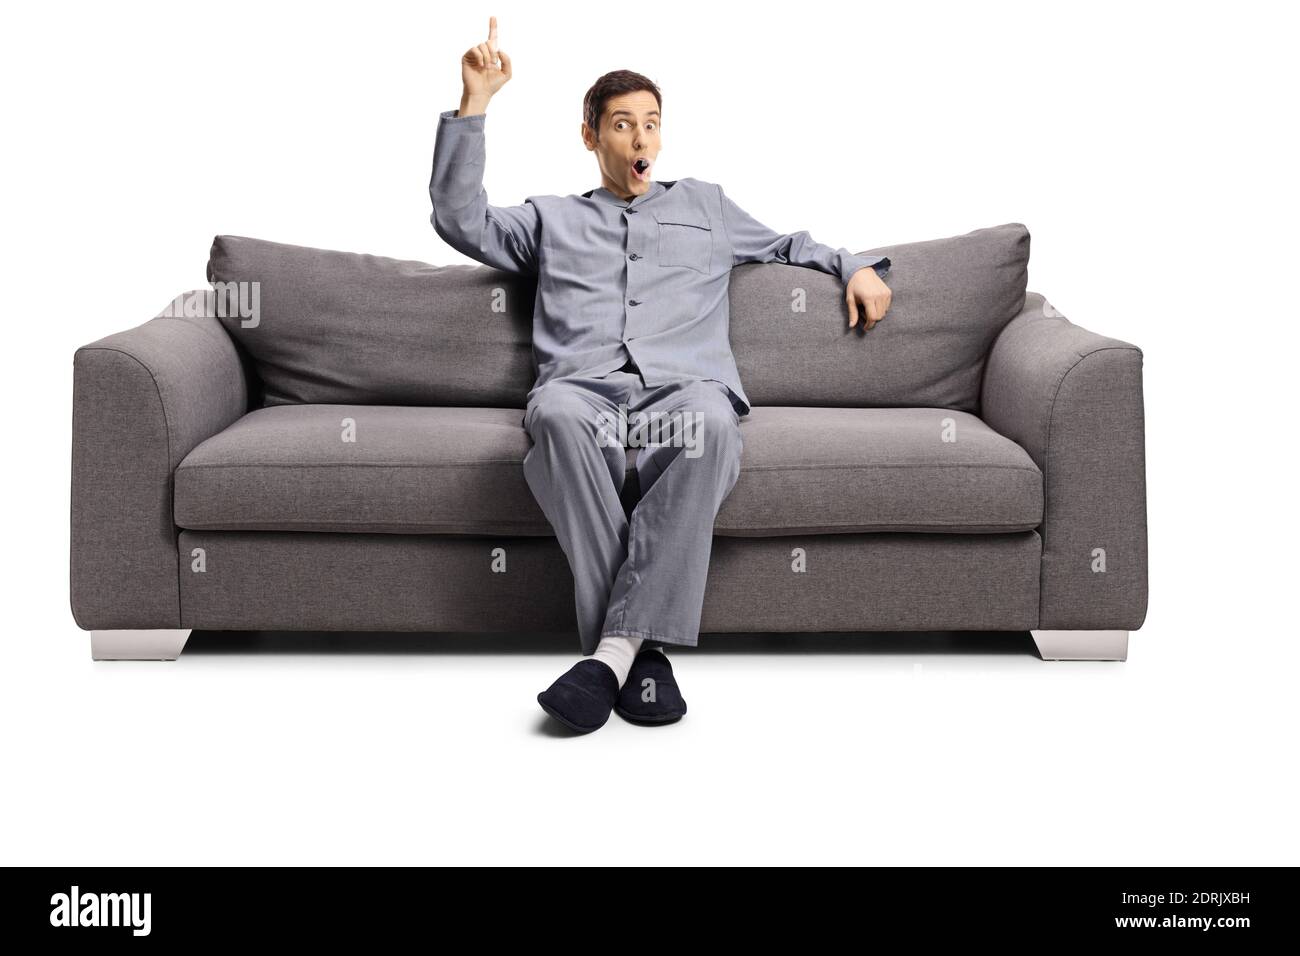 Young man in pajamas seated on a sofa pointing up isolated on white background Stock Photo